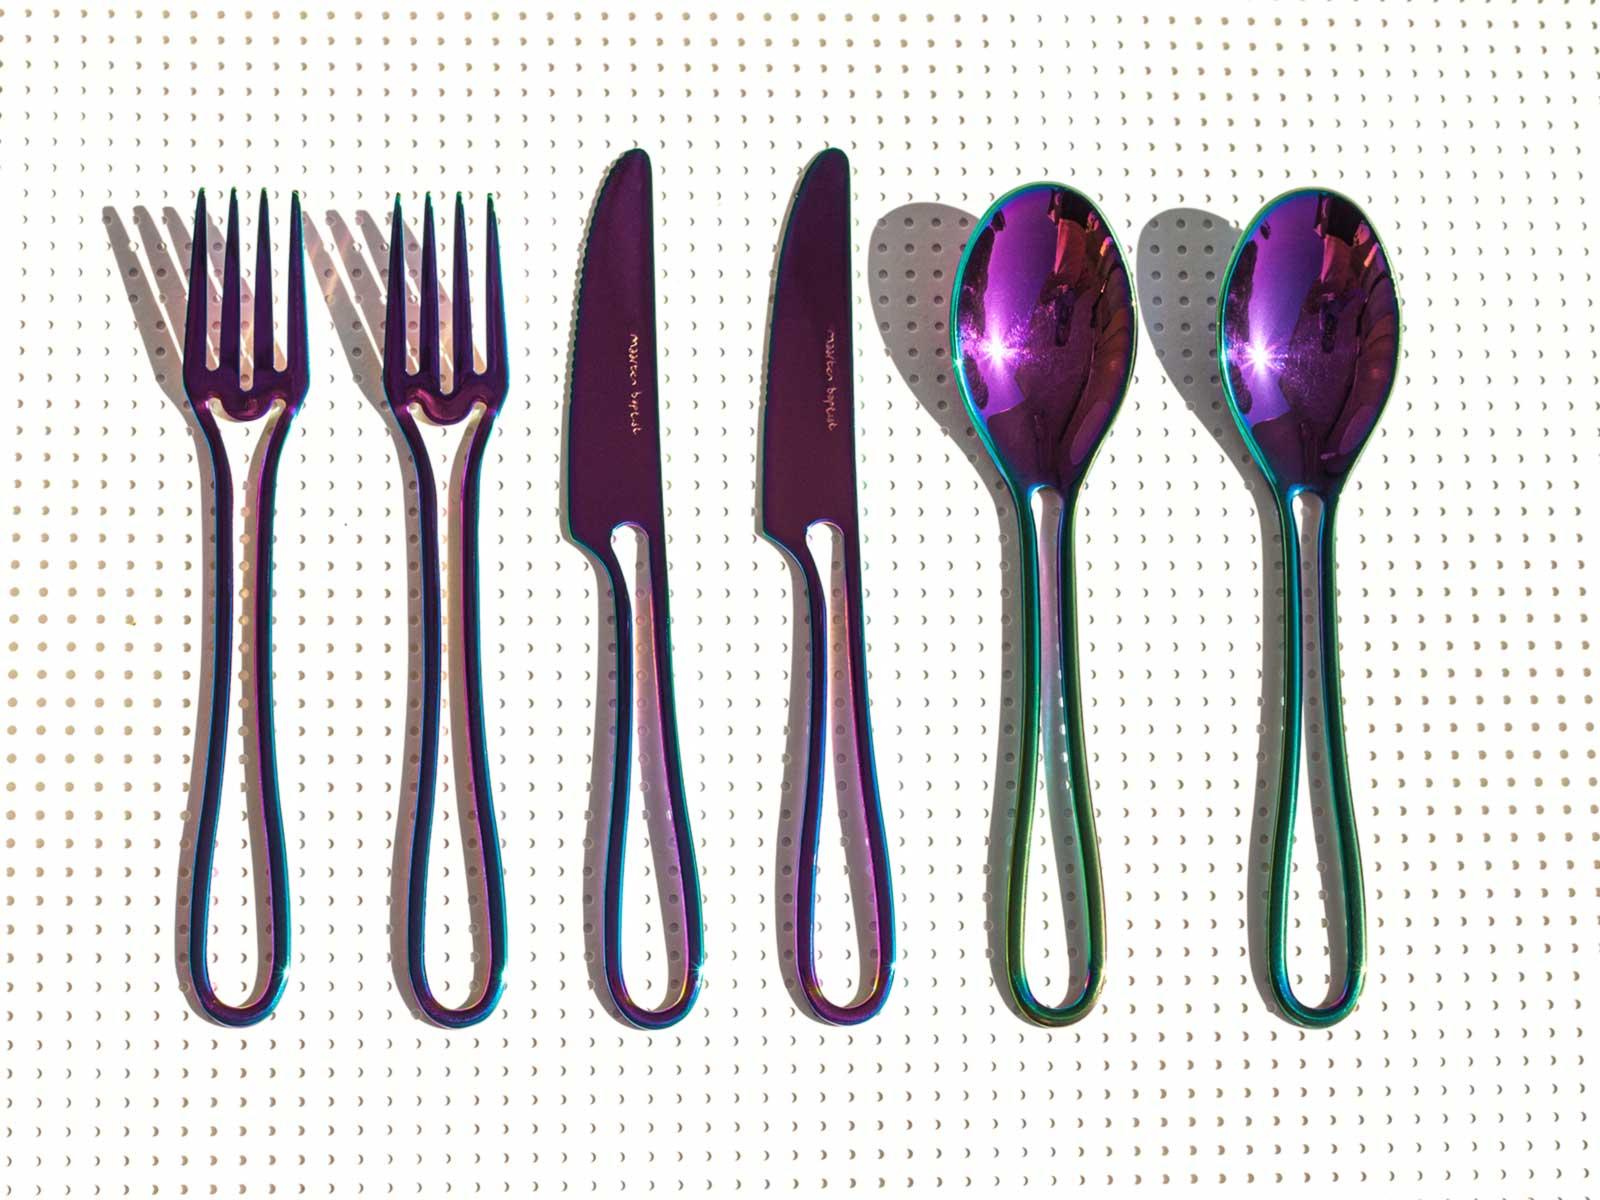 Stainless Steel 36 pices OUTLINE RAINBOW cutlery set by Maarten Baptist  For Sale